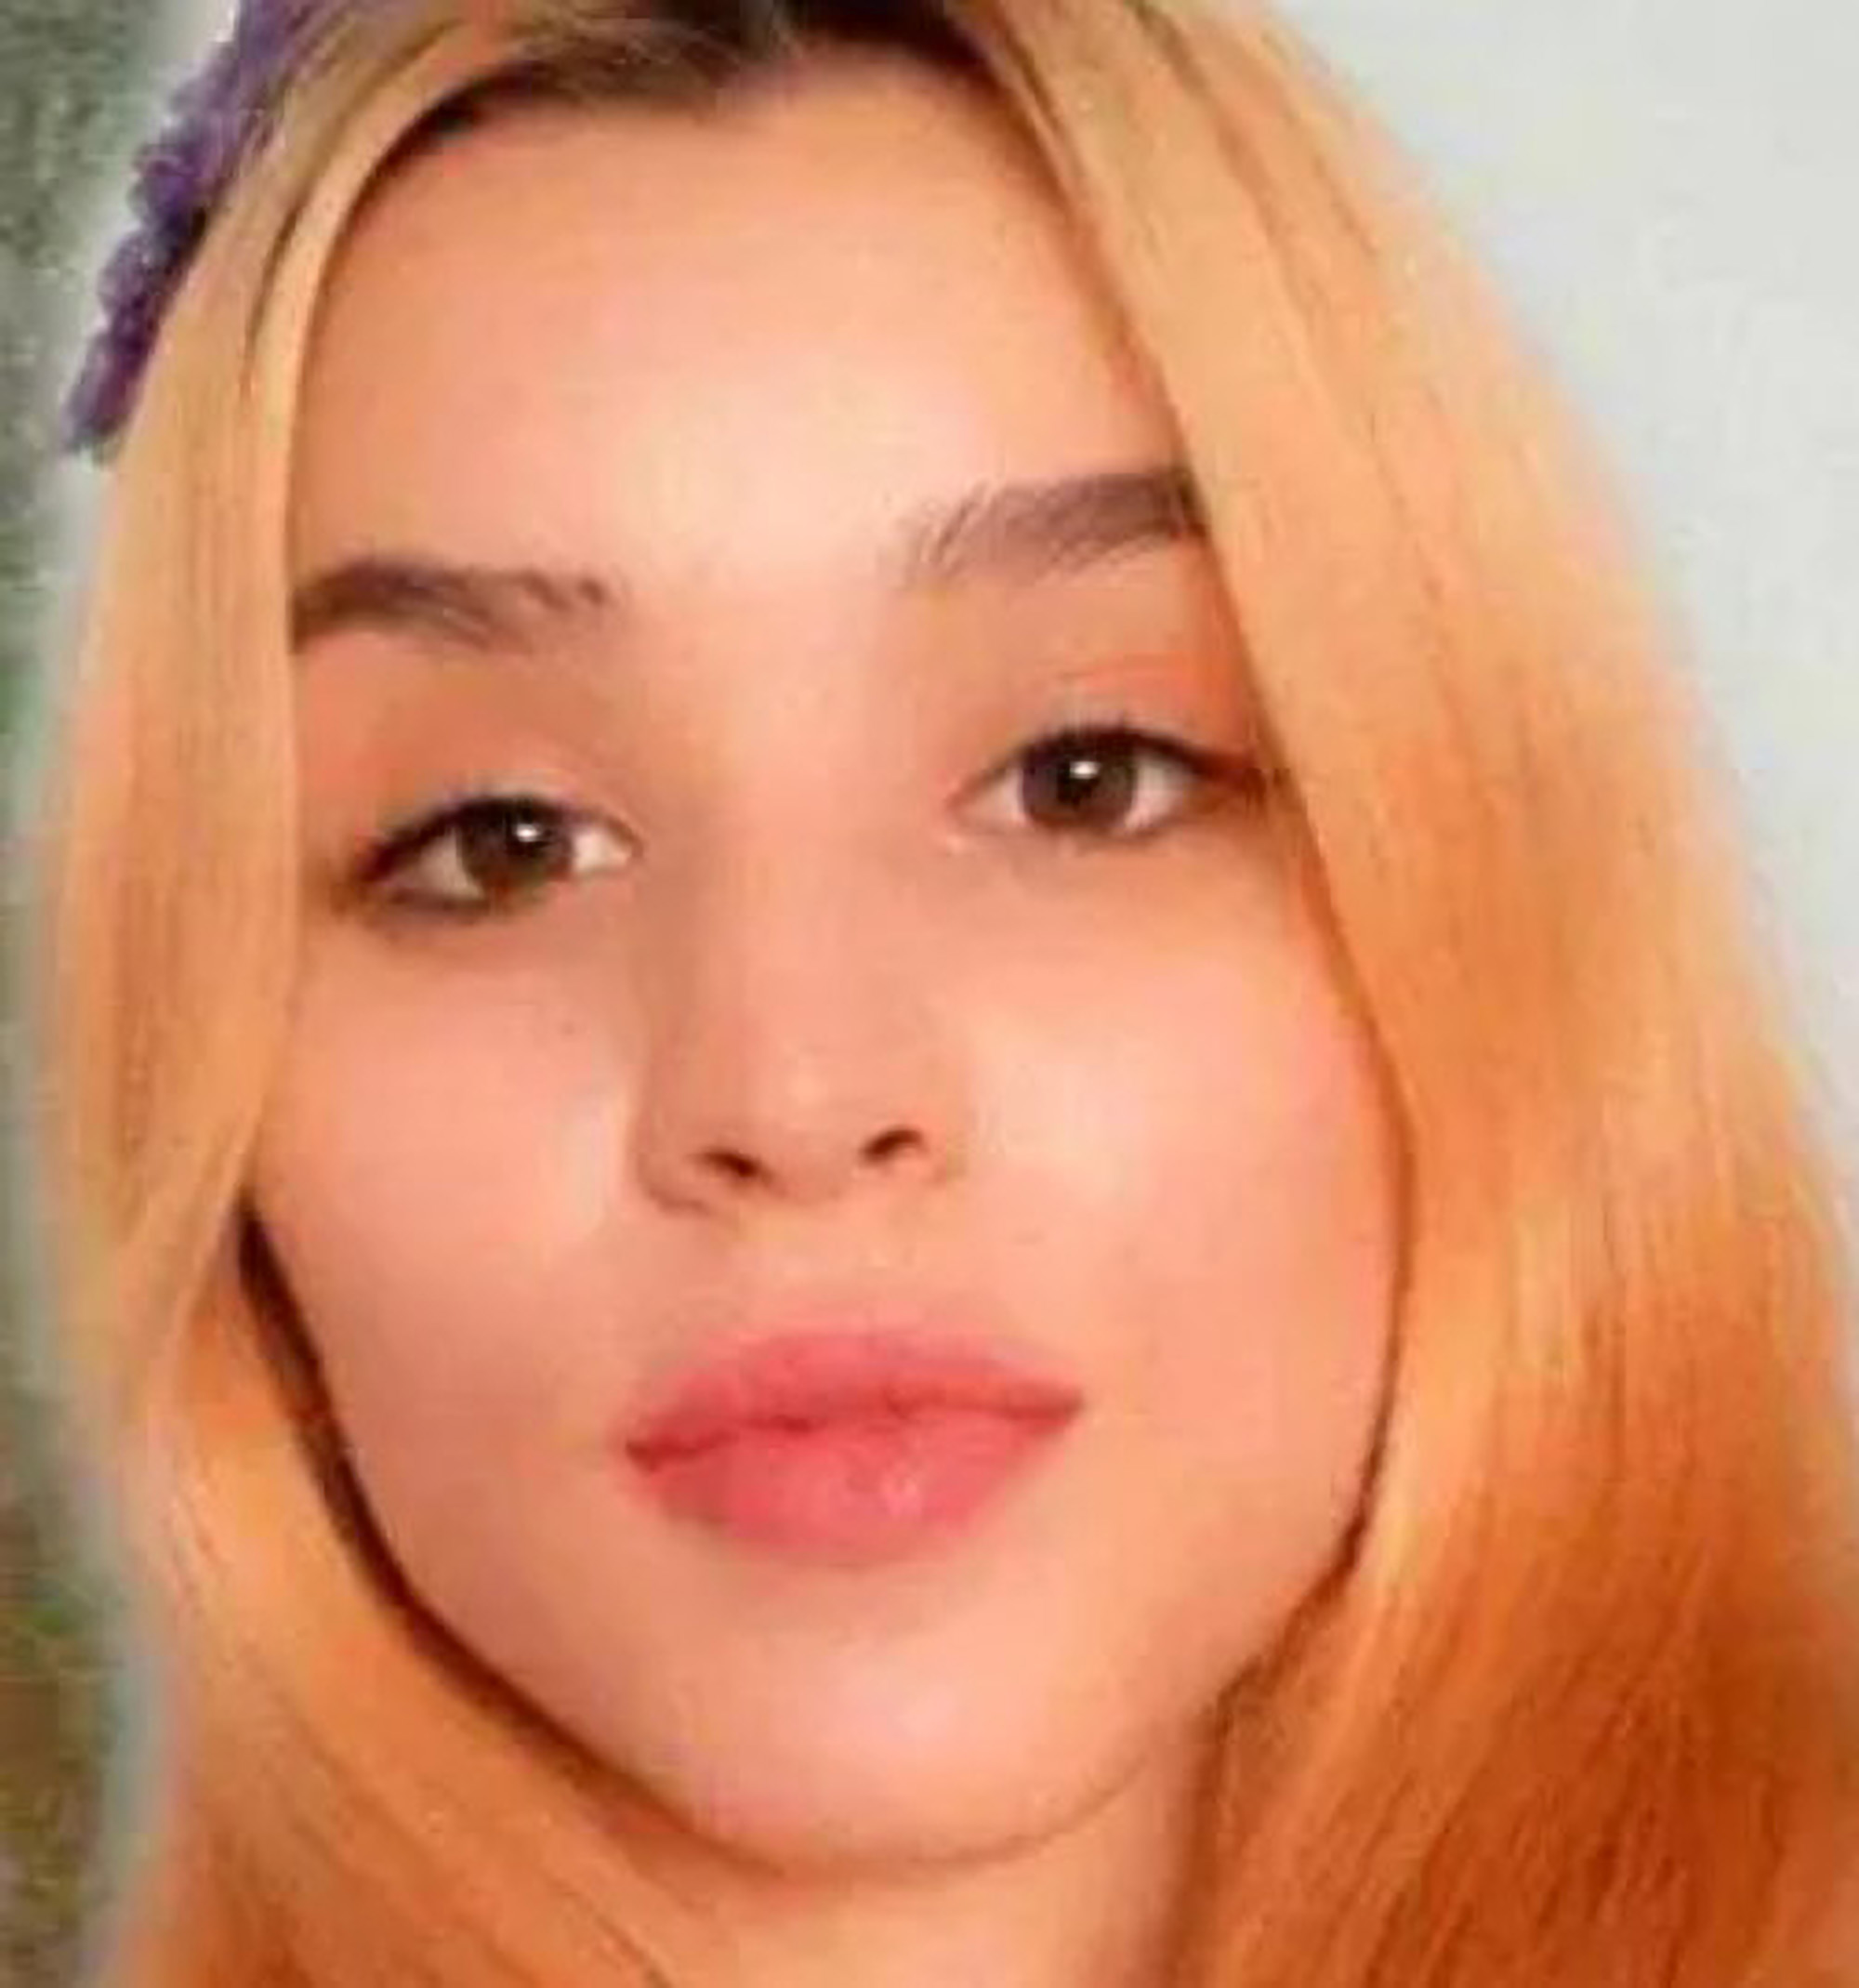 Teen Girl Who Campaigned For An End To Violence Against Women Is Stabbed To Death By Boyfriend